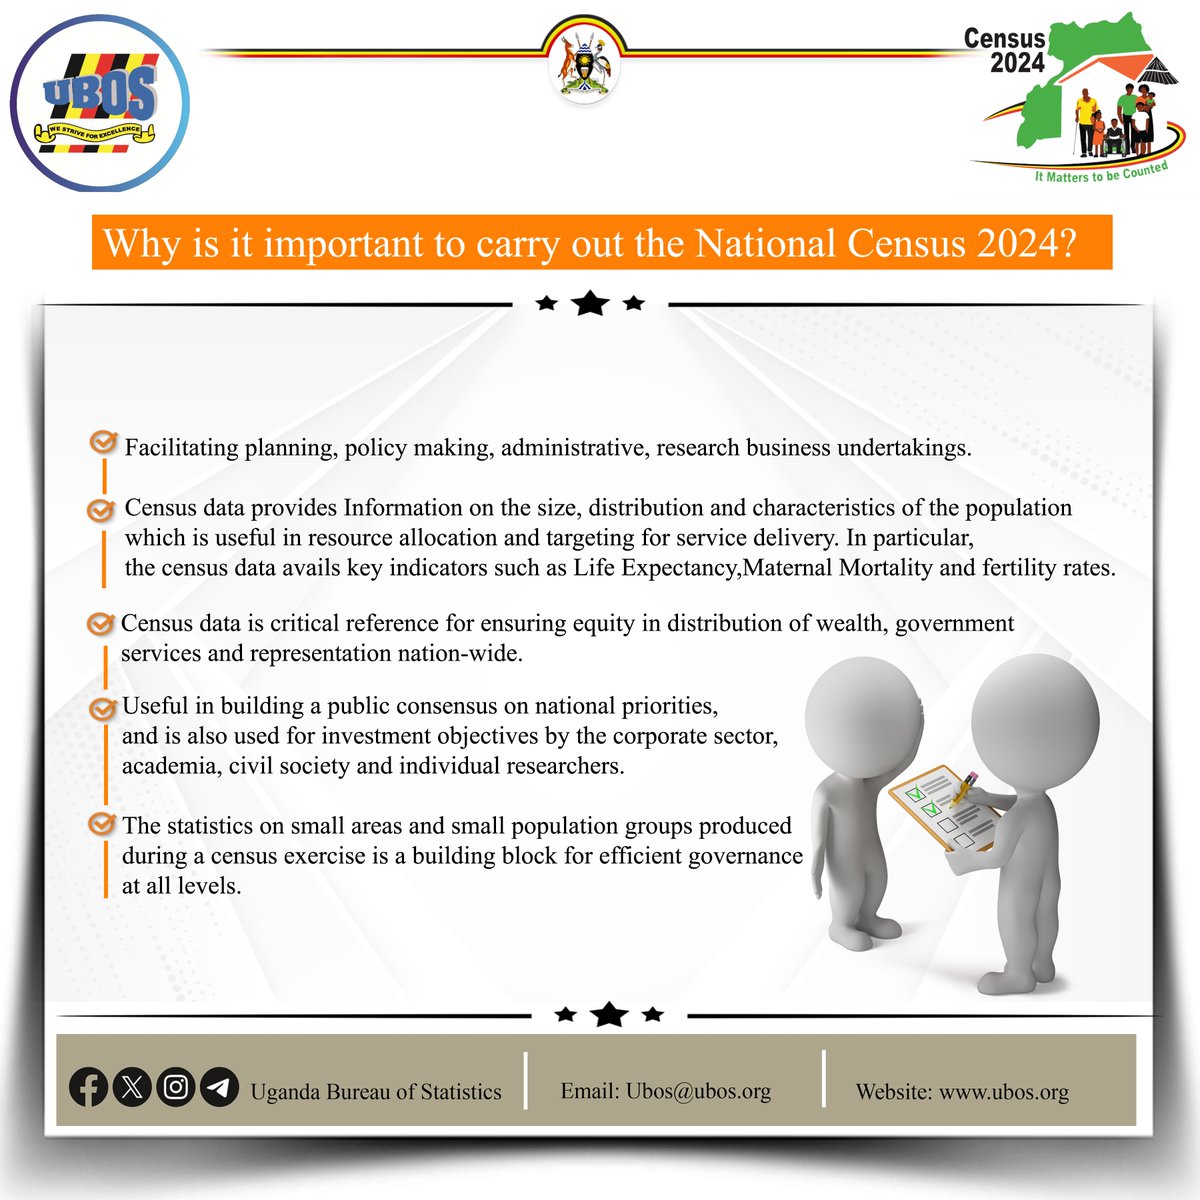 #UgandaCensus2024 𝐀𝐫𝐞 𝐲𝐨𝐮 𝐚𝐰𝐚𝐫𝐞? The upcoming 10th May 2024 National Census is set to collect data that will play a crucial role in the allocation of wealth, dispensation of government services, and general representation. Census 2024-It Mattes to be counted.